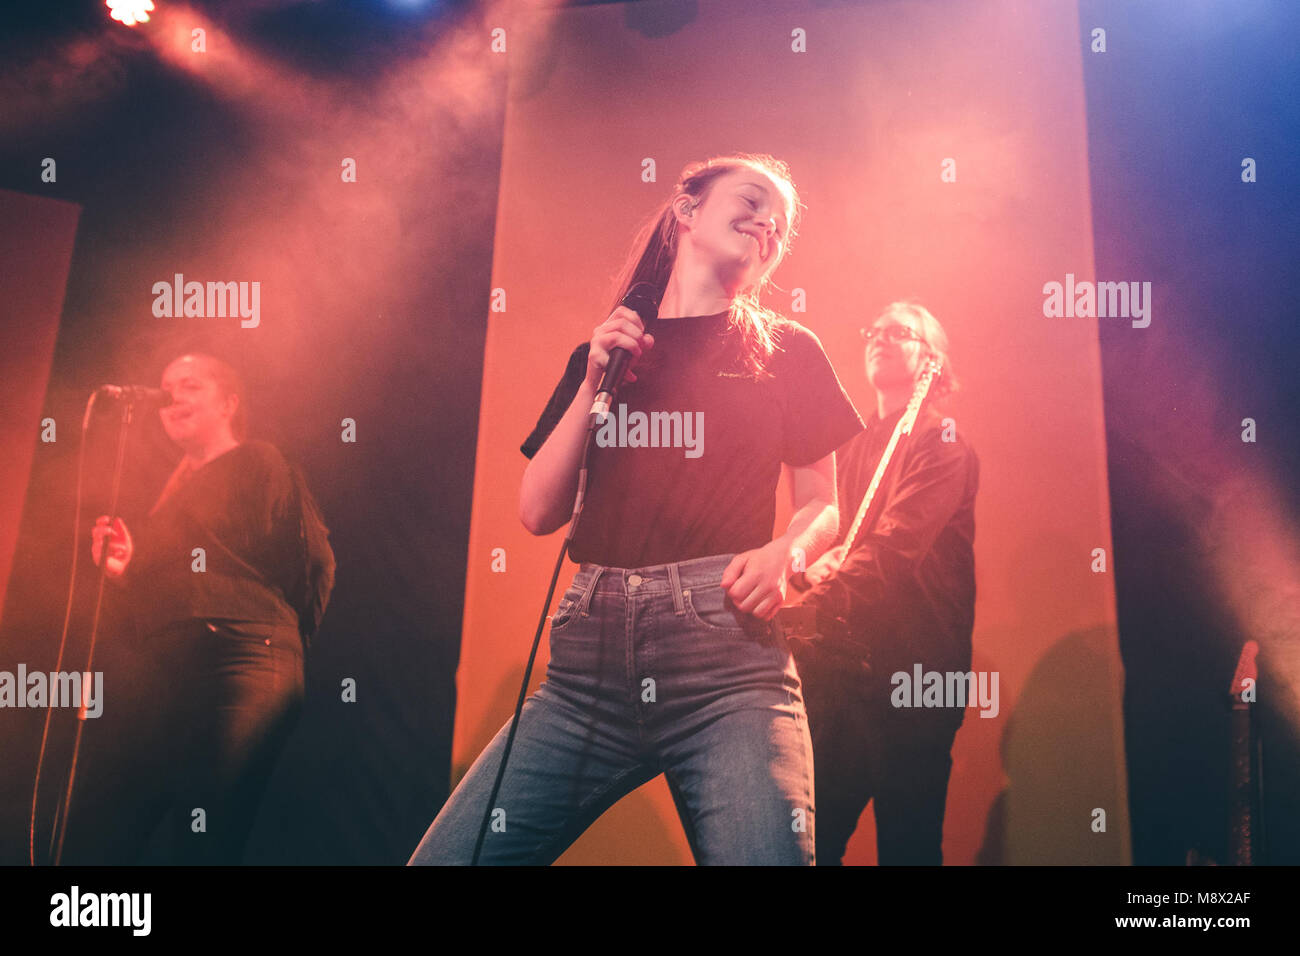 Leeds, Yorkshire, UK March 20, 2018 - Norwegian singer/songwriter, Sigrid Solbakk Raabe, better known by her stage name 'Sigrid', performs at the Leeds Stylus on her debut UK tour, 2018 Credit: Myles Wright/ZUMA Wire/Alamy Live News Stock Photo